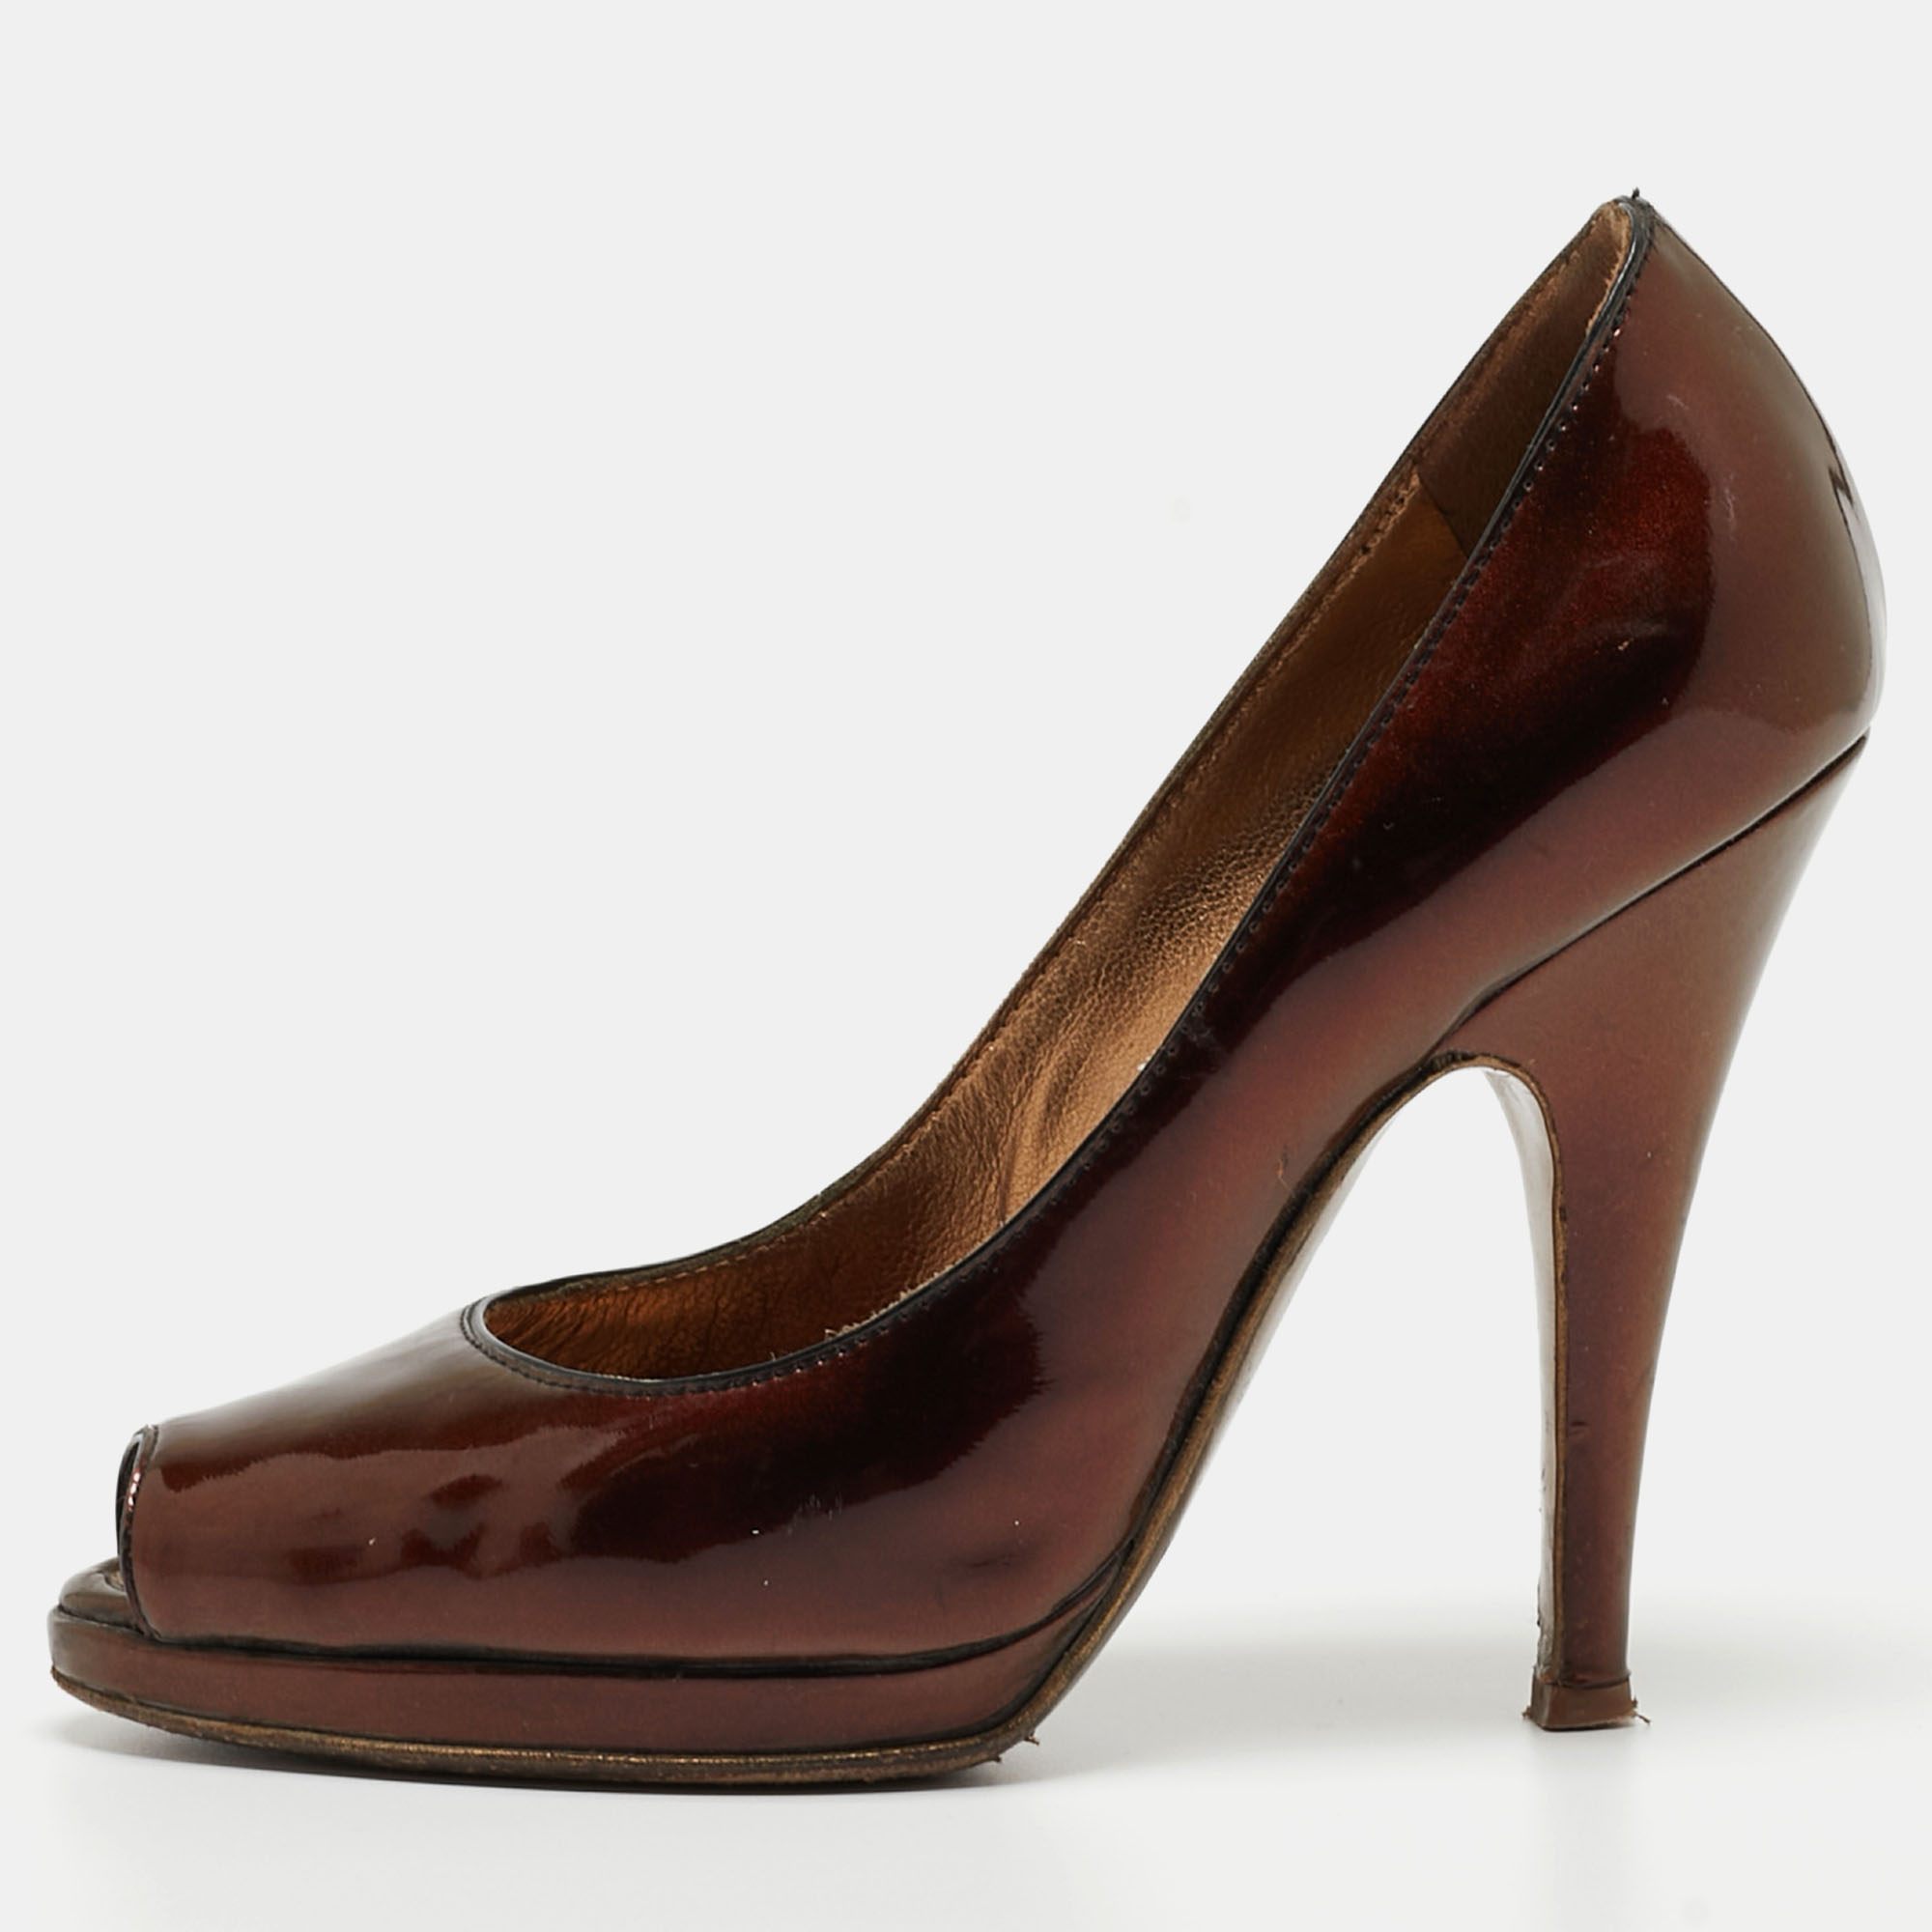 The fashion house's tradition of excellence coupled with modern design sensibilities works to make these pumps a fabulous choice. Theyll help you deliver a chic look with ease.